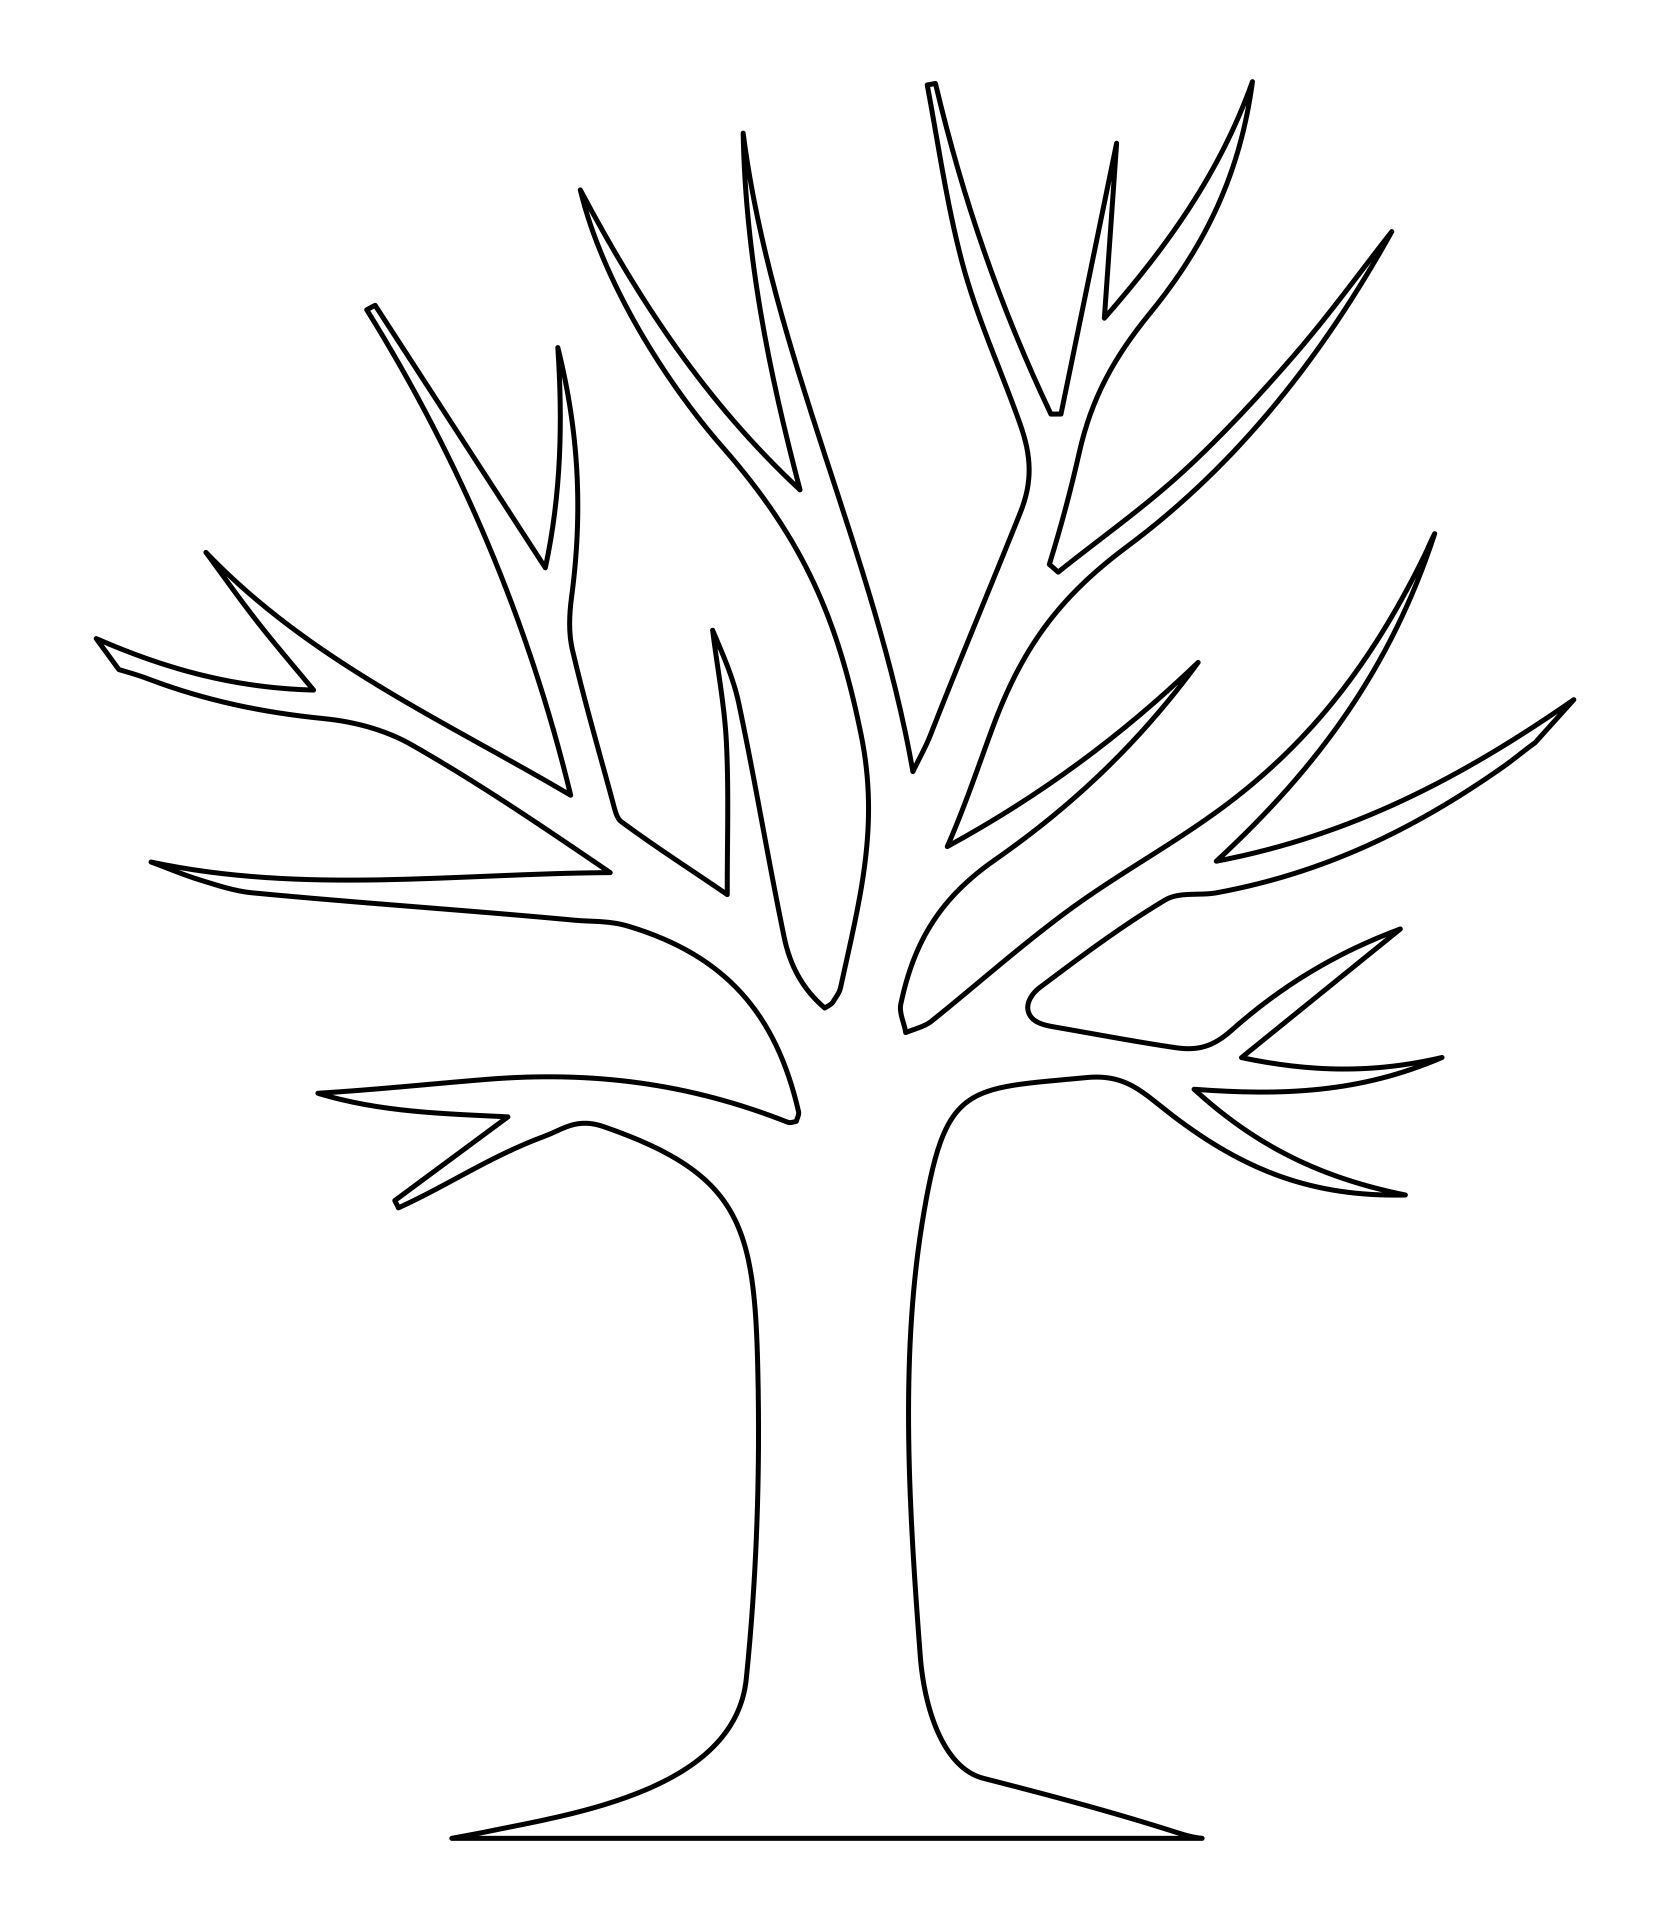 Printable Tree Branches With Pattern_21330